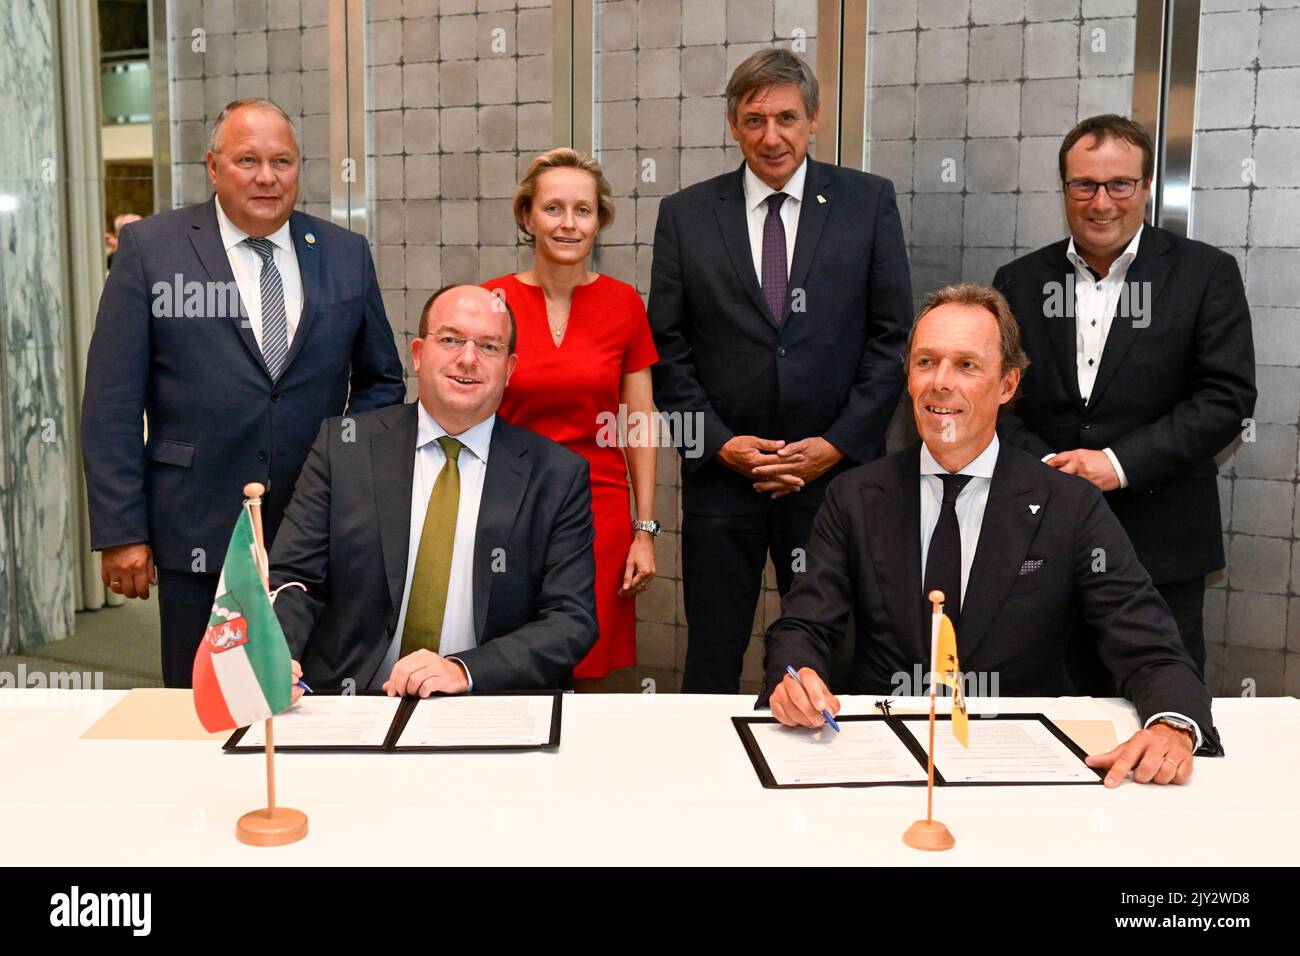 Markus Bangen Chief Executive Officer of Duisburger Hafen AG, Jacques Vandermeiren, CEO Port Of Antwerp, Annick De Ridder, Chairman Port of Antwerp and Flemish Minister President Jan Jambon pictured during the signing of a Memorandum of Understanding between the two ports, during a diplomatic meeting between Flanders and the German state of North Rhine-Westphalia, Wednesday 07 September 2022 in Dusseldorf. BELGA PHOTO DIRK WAEM Stock Photo